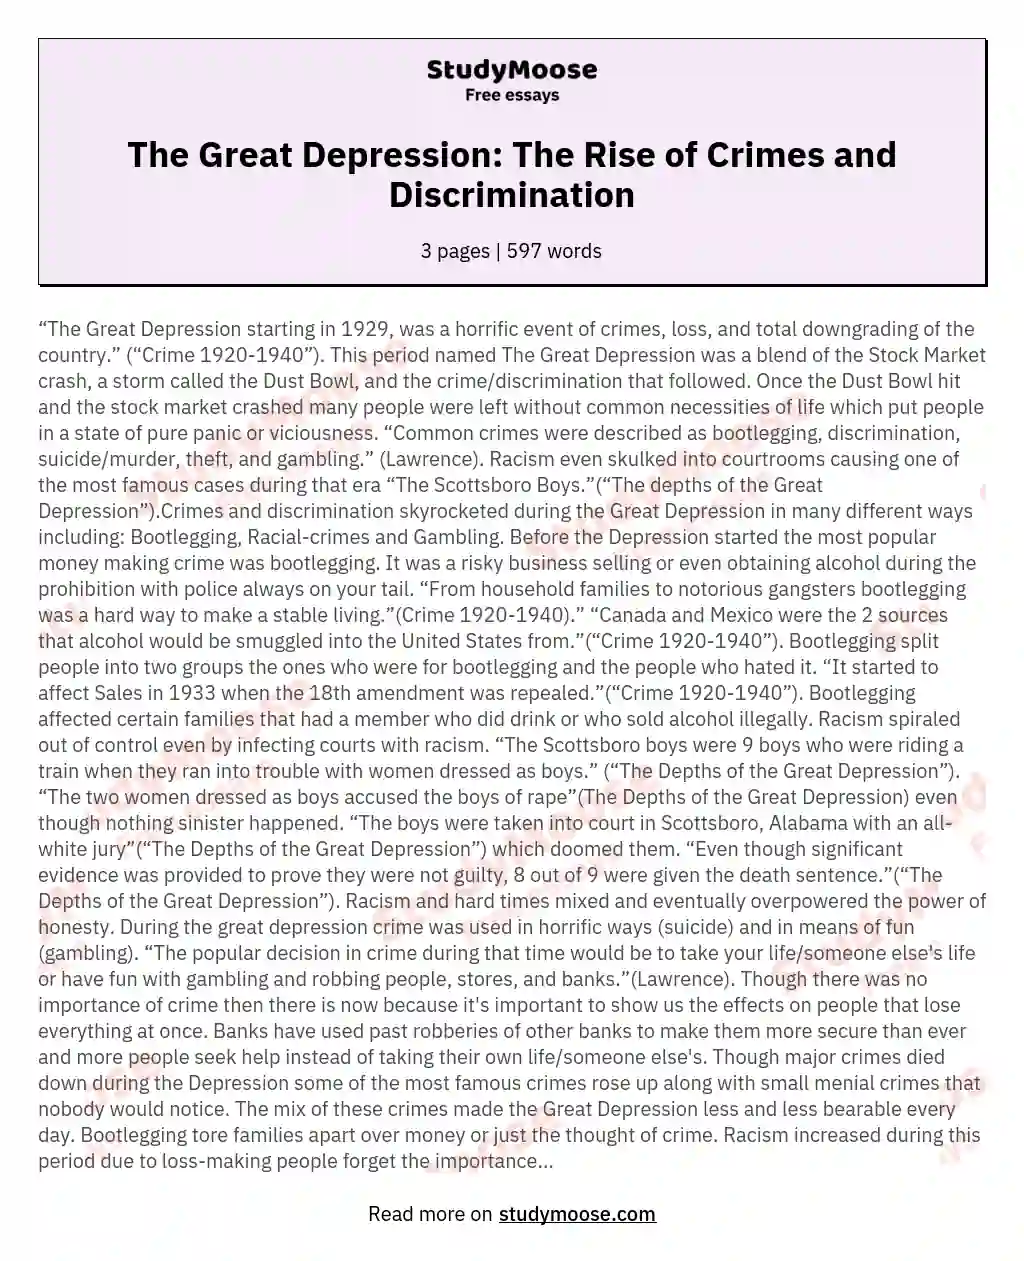 The Great Depression: The Rise of Crimes and Discrimination essay